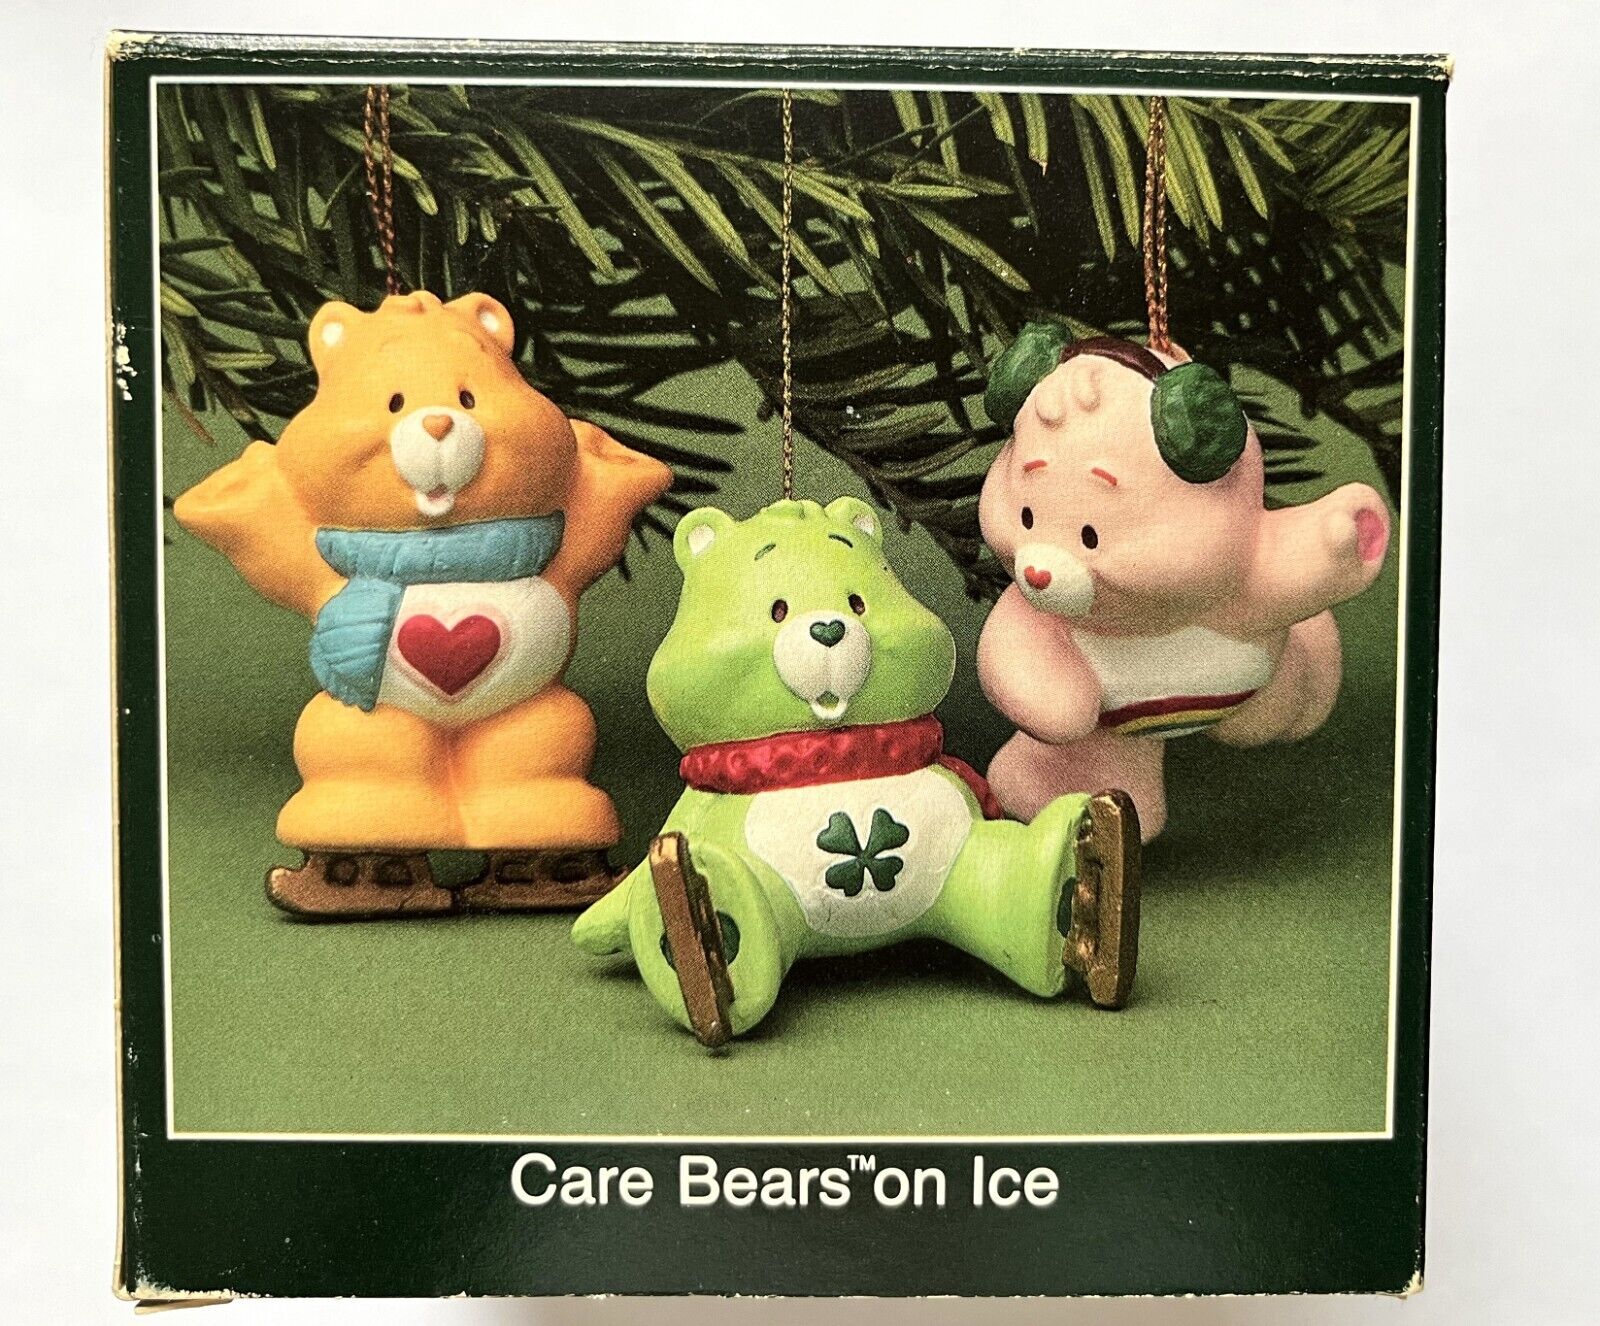 1986 American Greetings CARE BEARS on Ice Set of 3 Ornaments SEALED